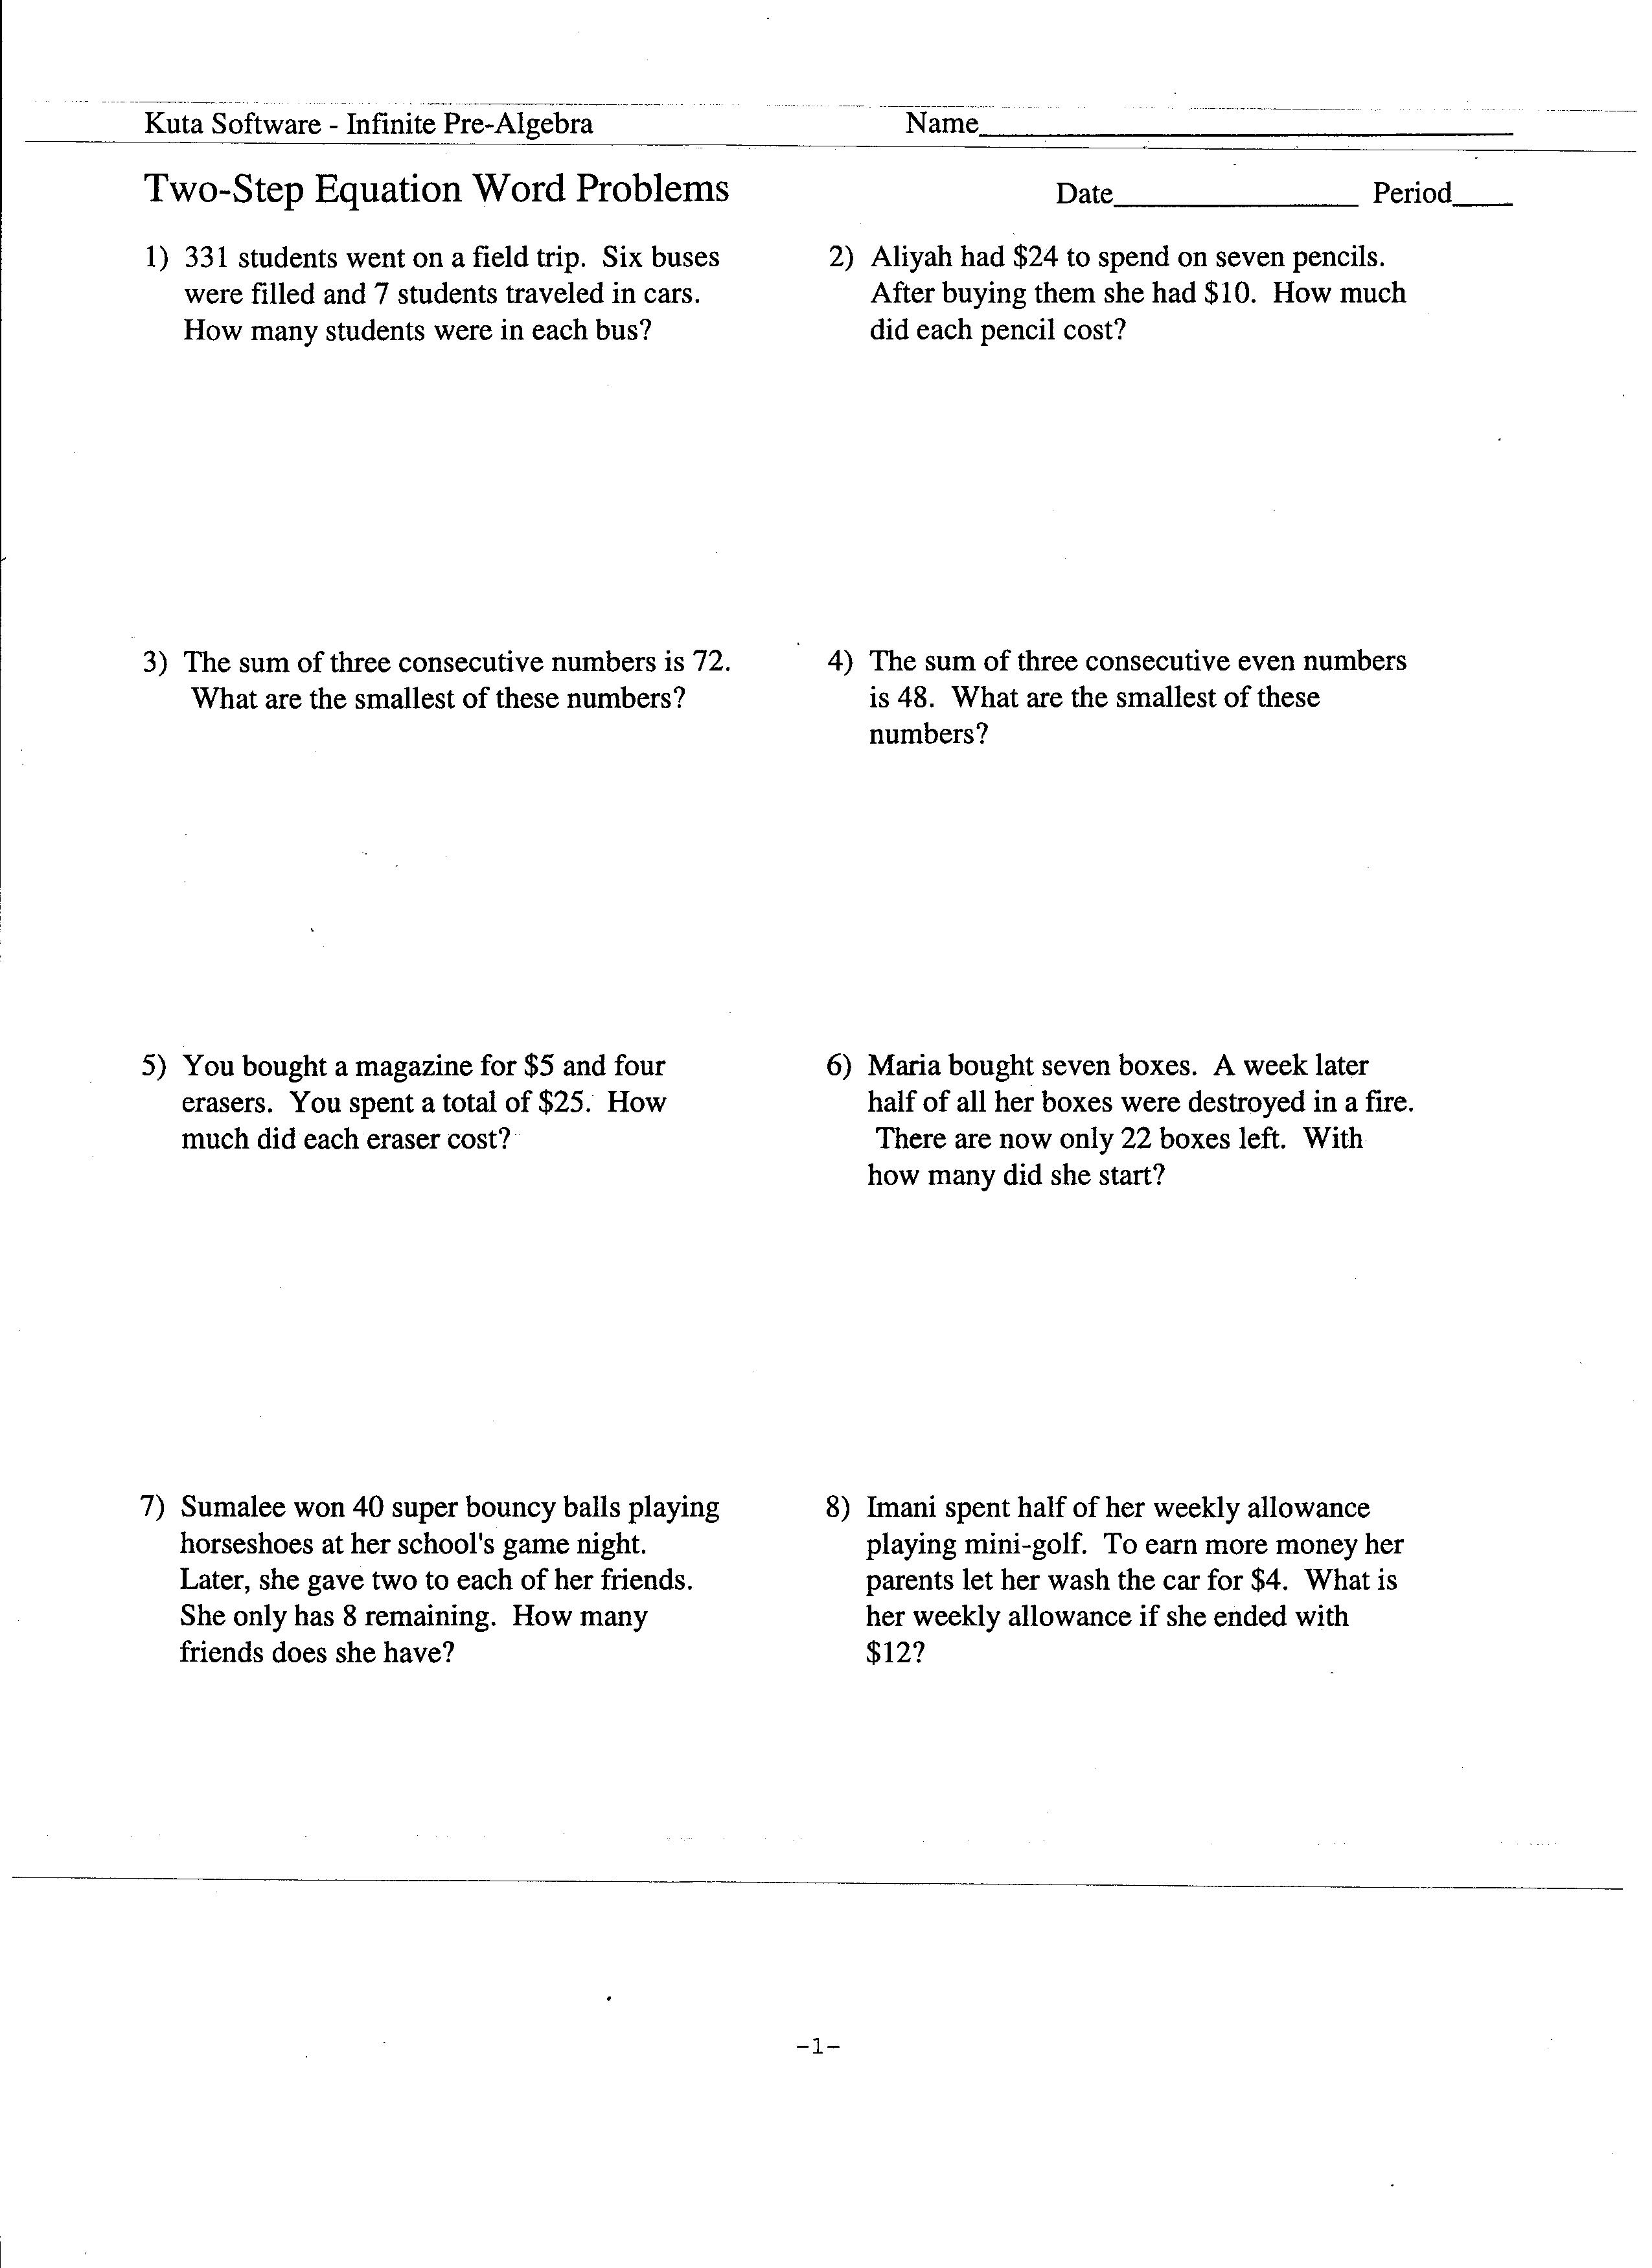 solving two step equation word problems